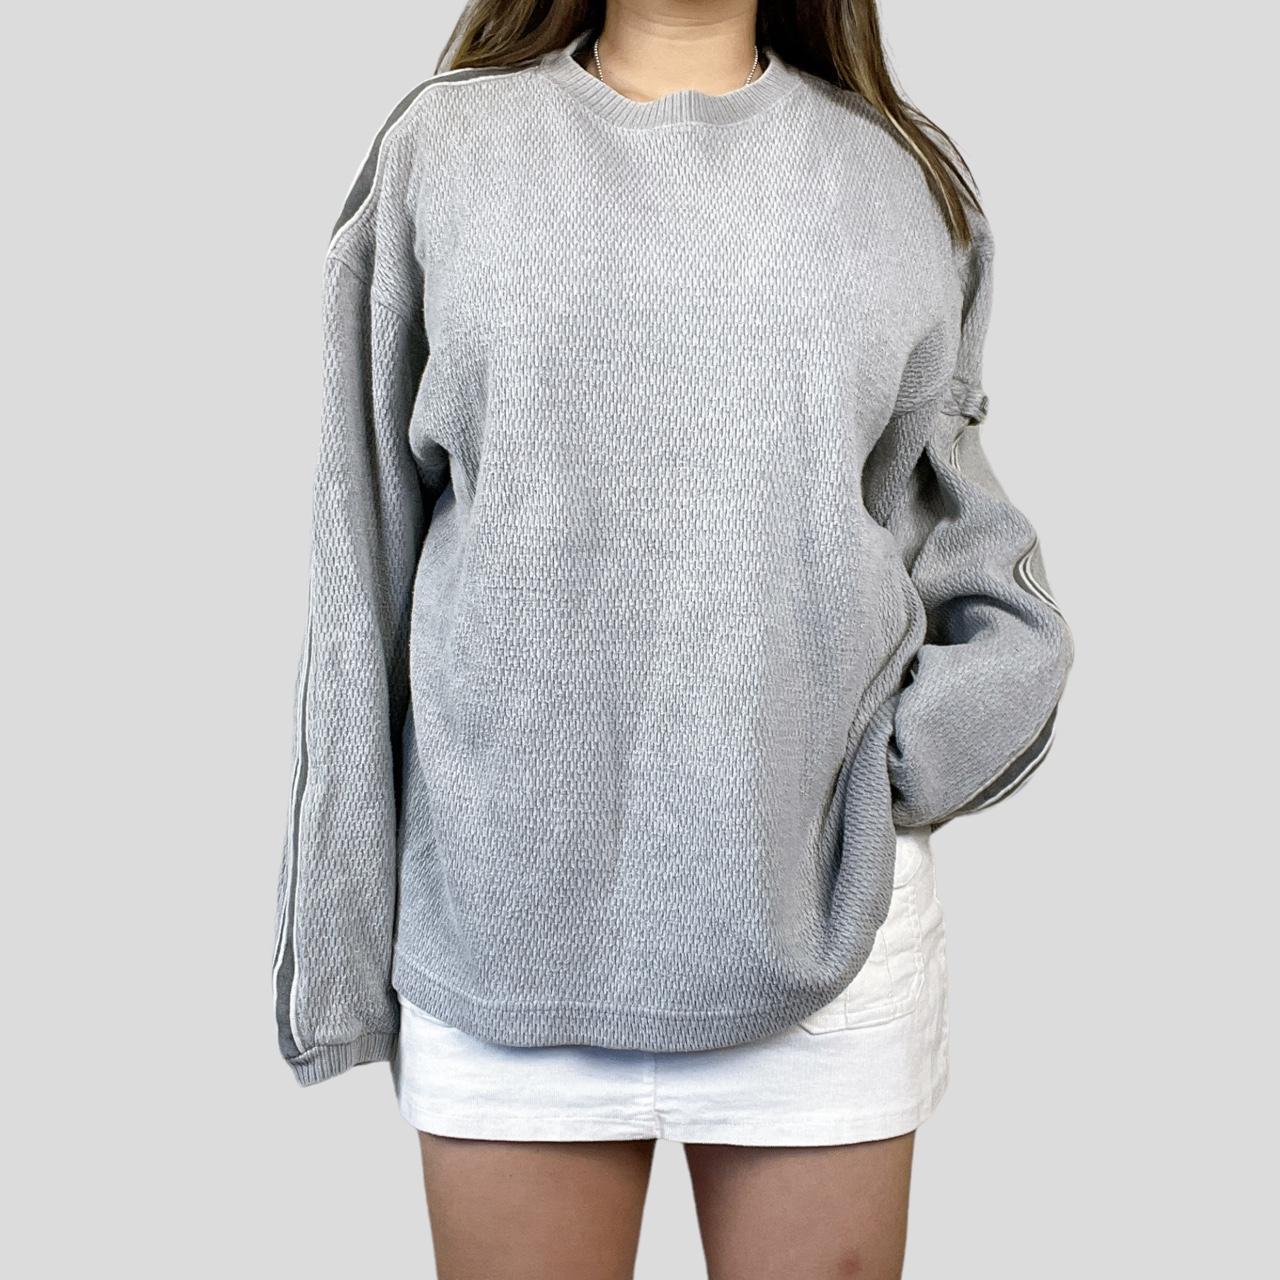 Product Image 3 - Preppy skater oversized sweater in